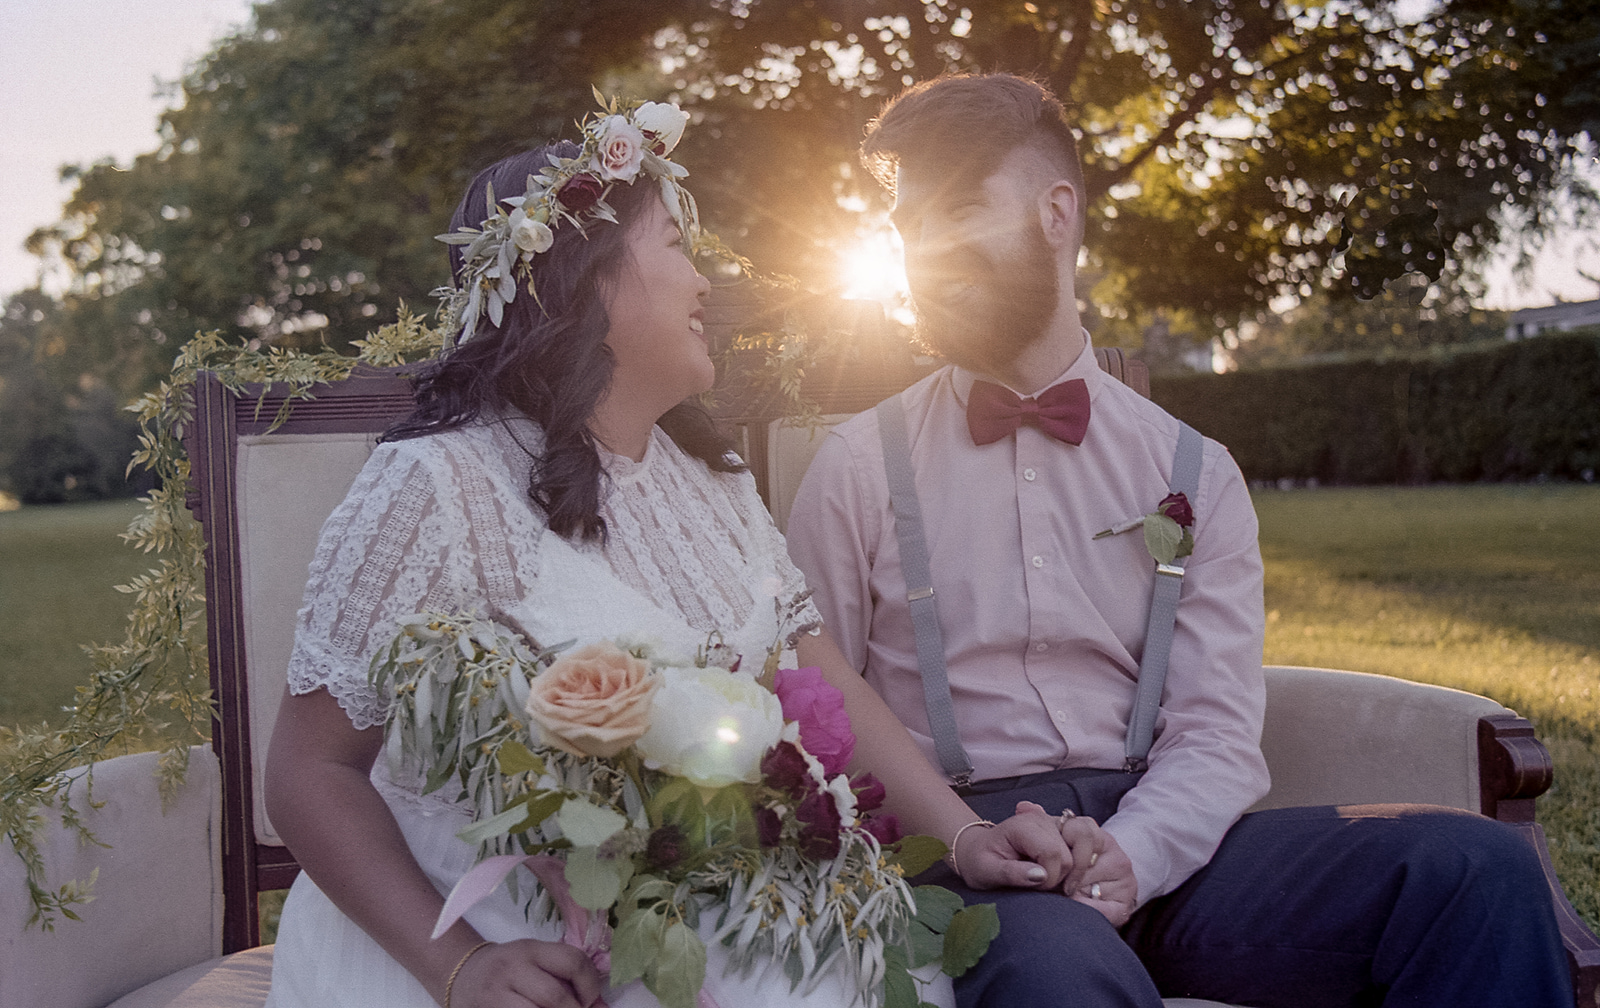 A Boho Chic Elopement on a Budget | Styled Shoot